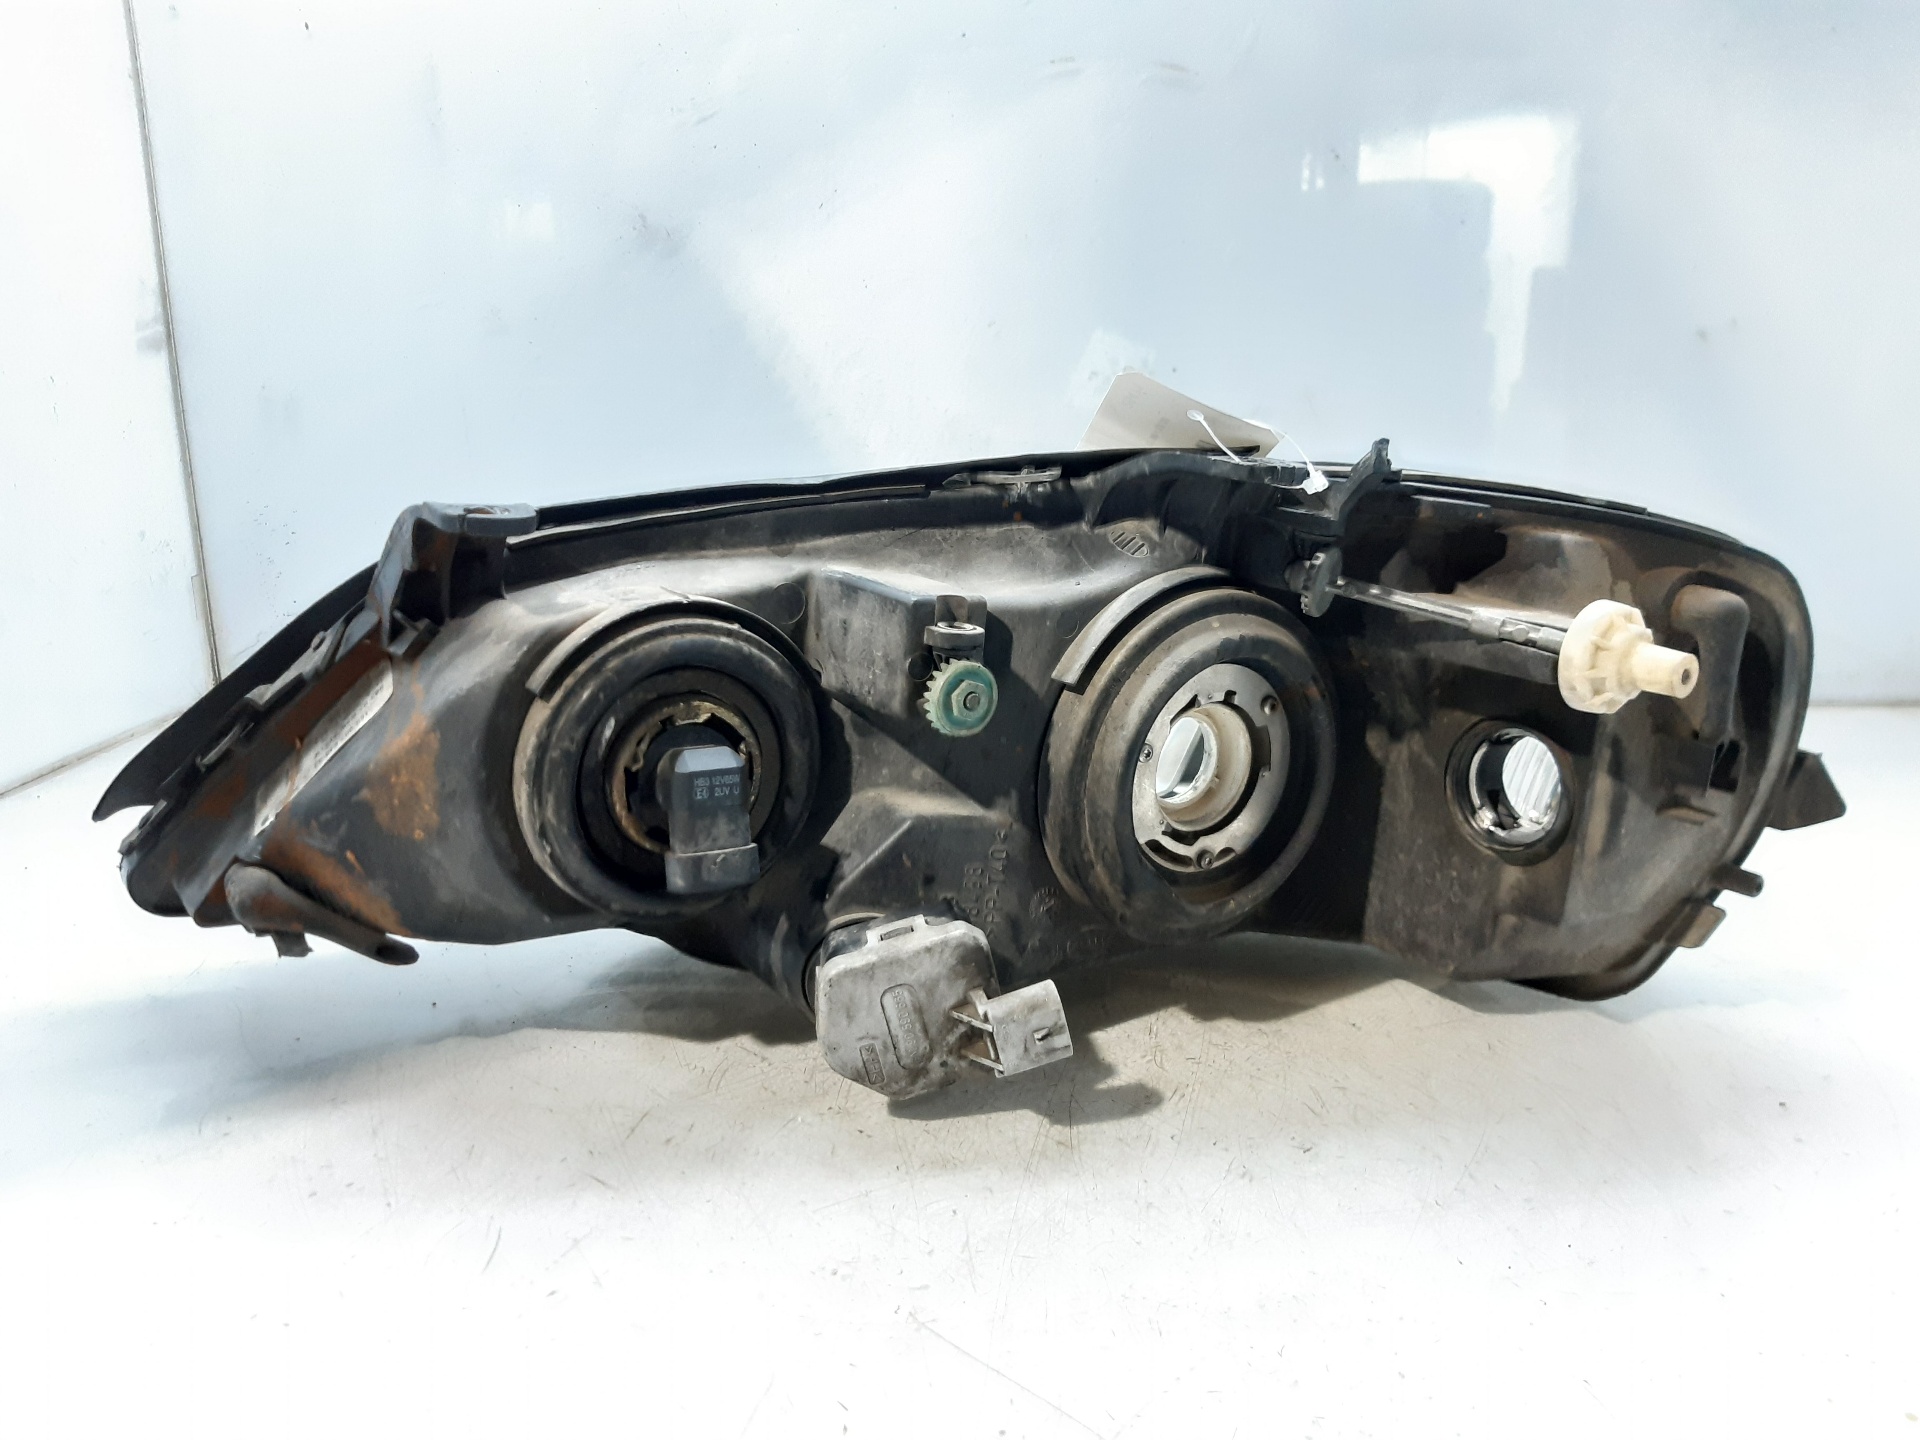 OPEL Astra H (2004-2014) Front Right Headlight 1216156 23906978